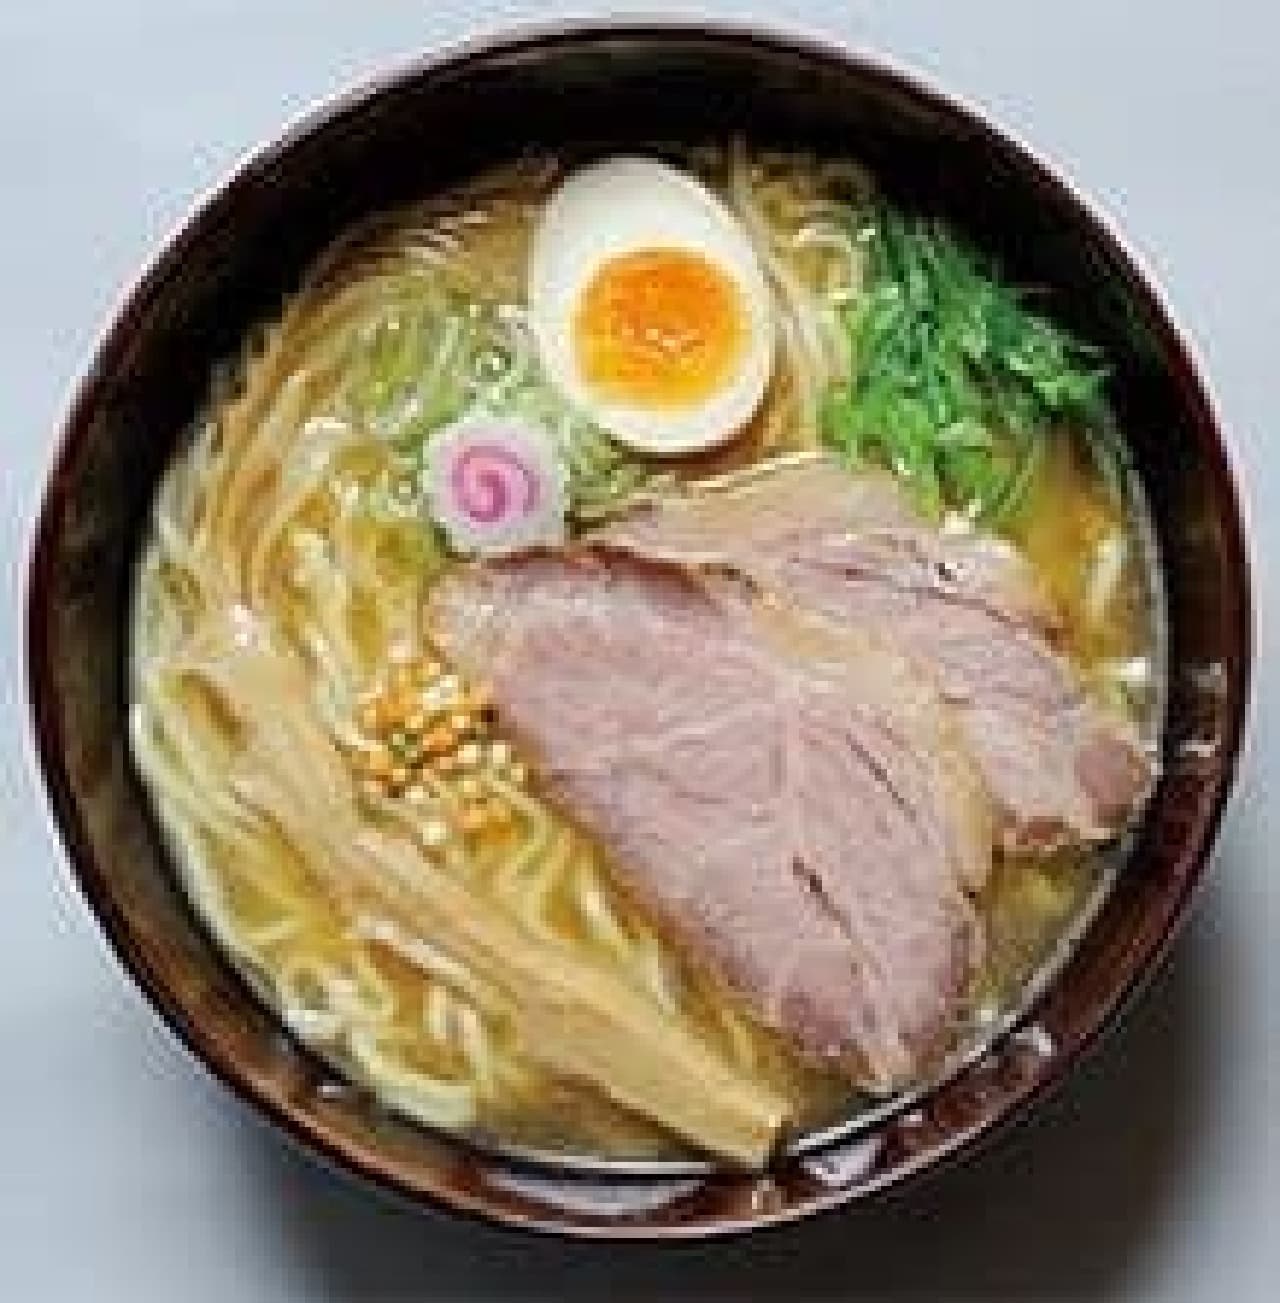 From simple ramen to unusual ramen ... Participating stores will be released soon!